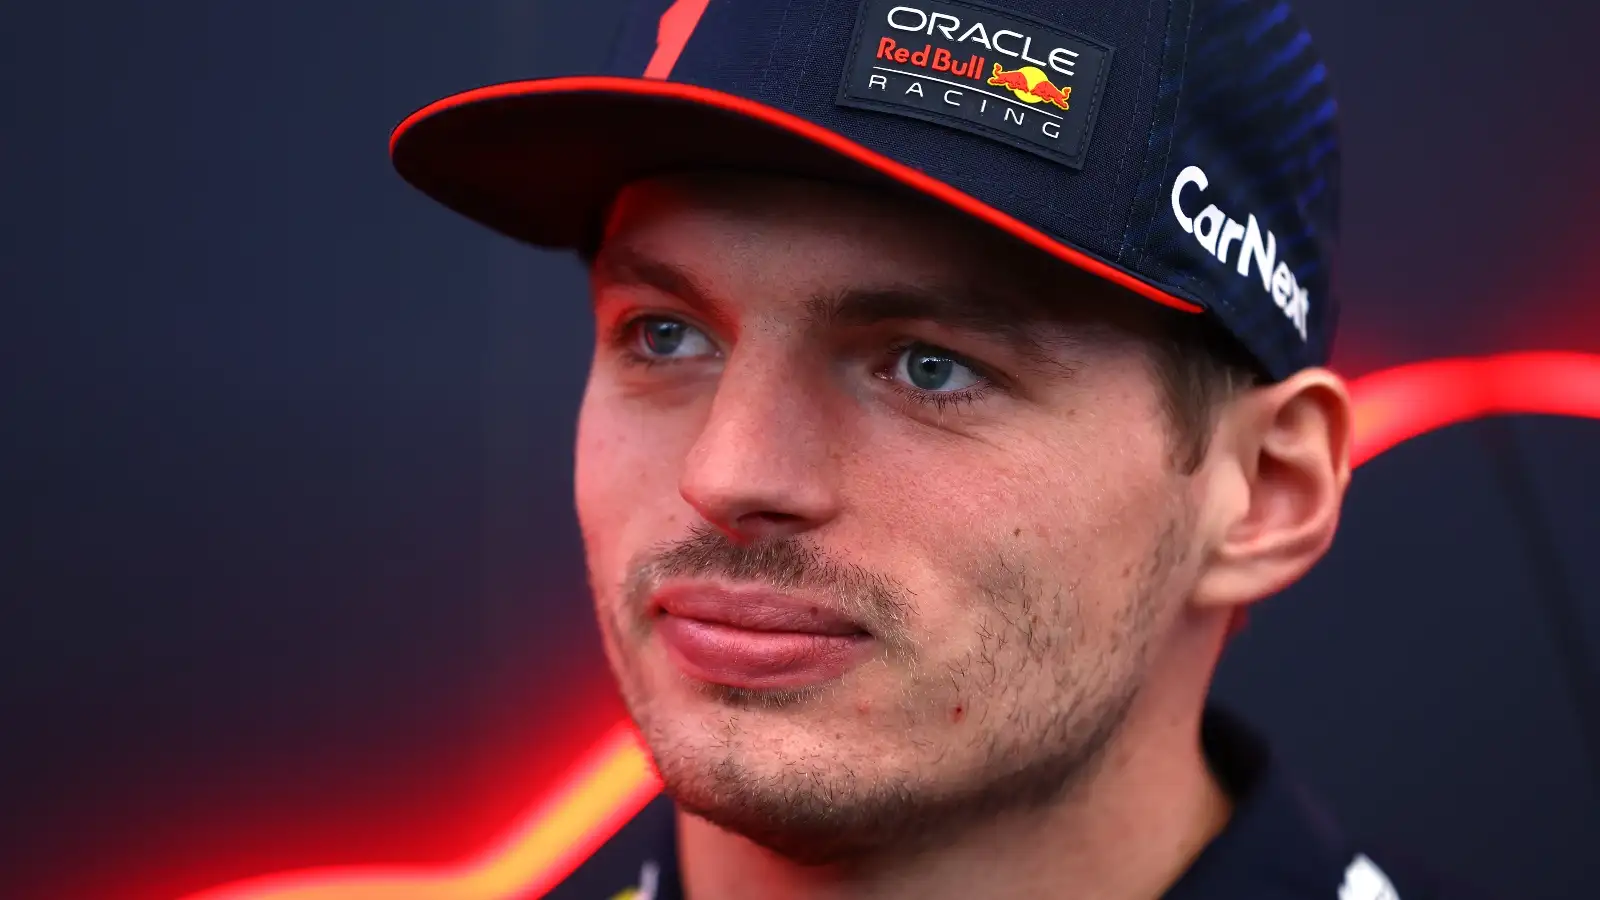 Max Verstappen looks past the camera with a slight smile.